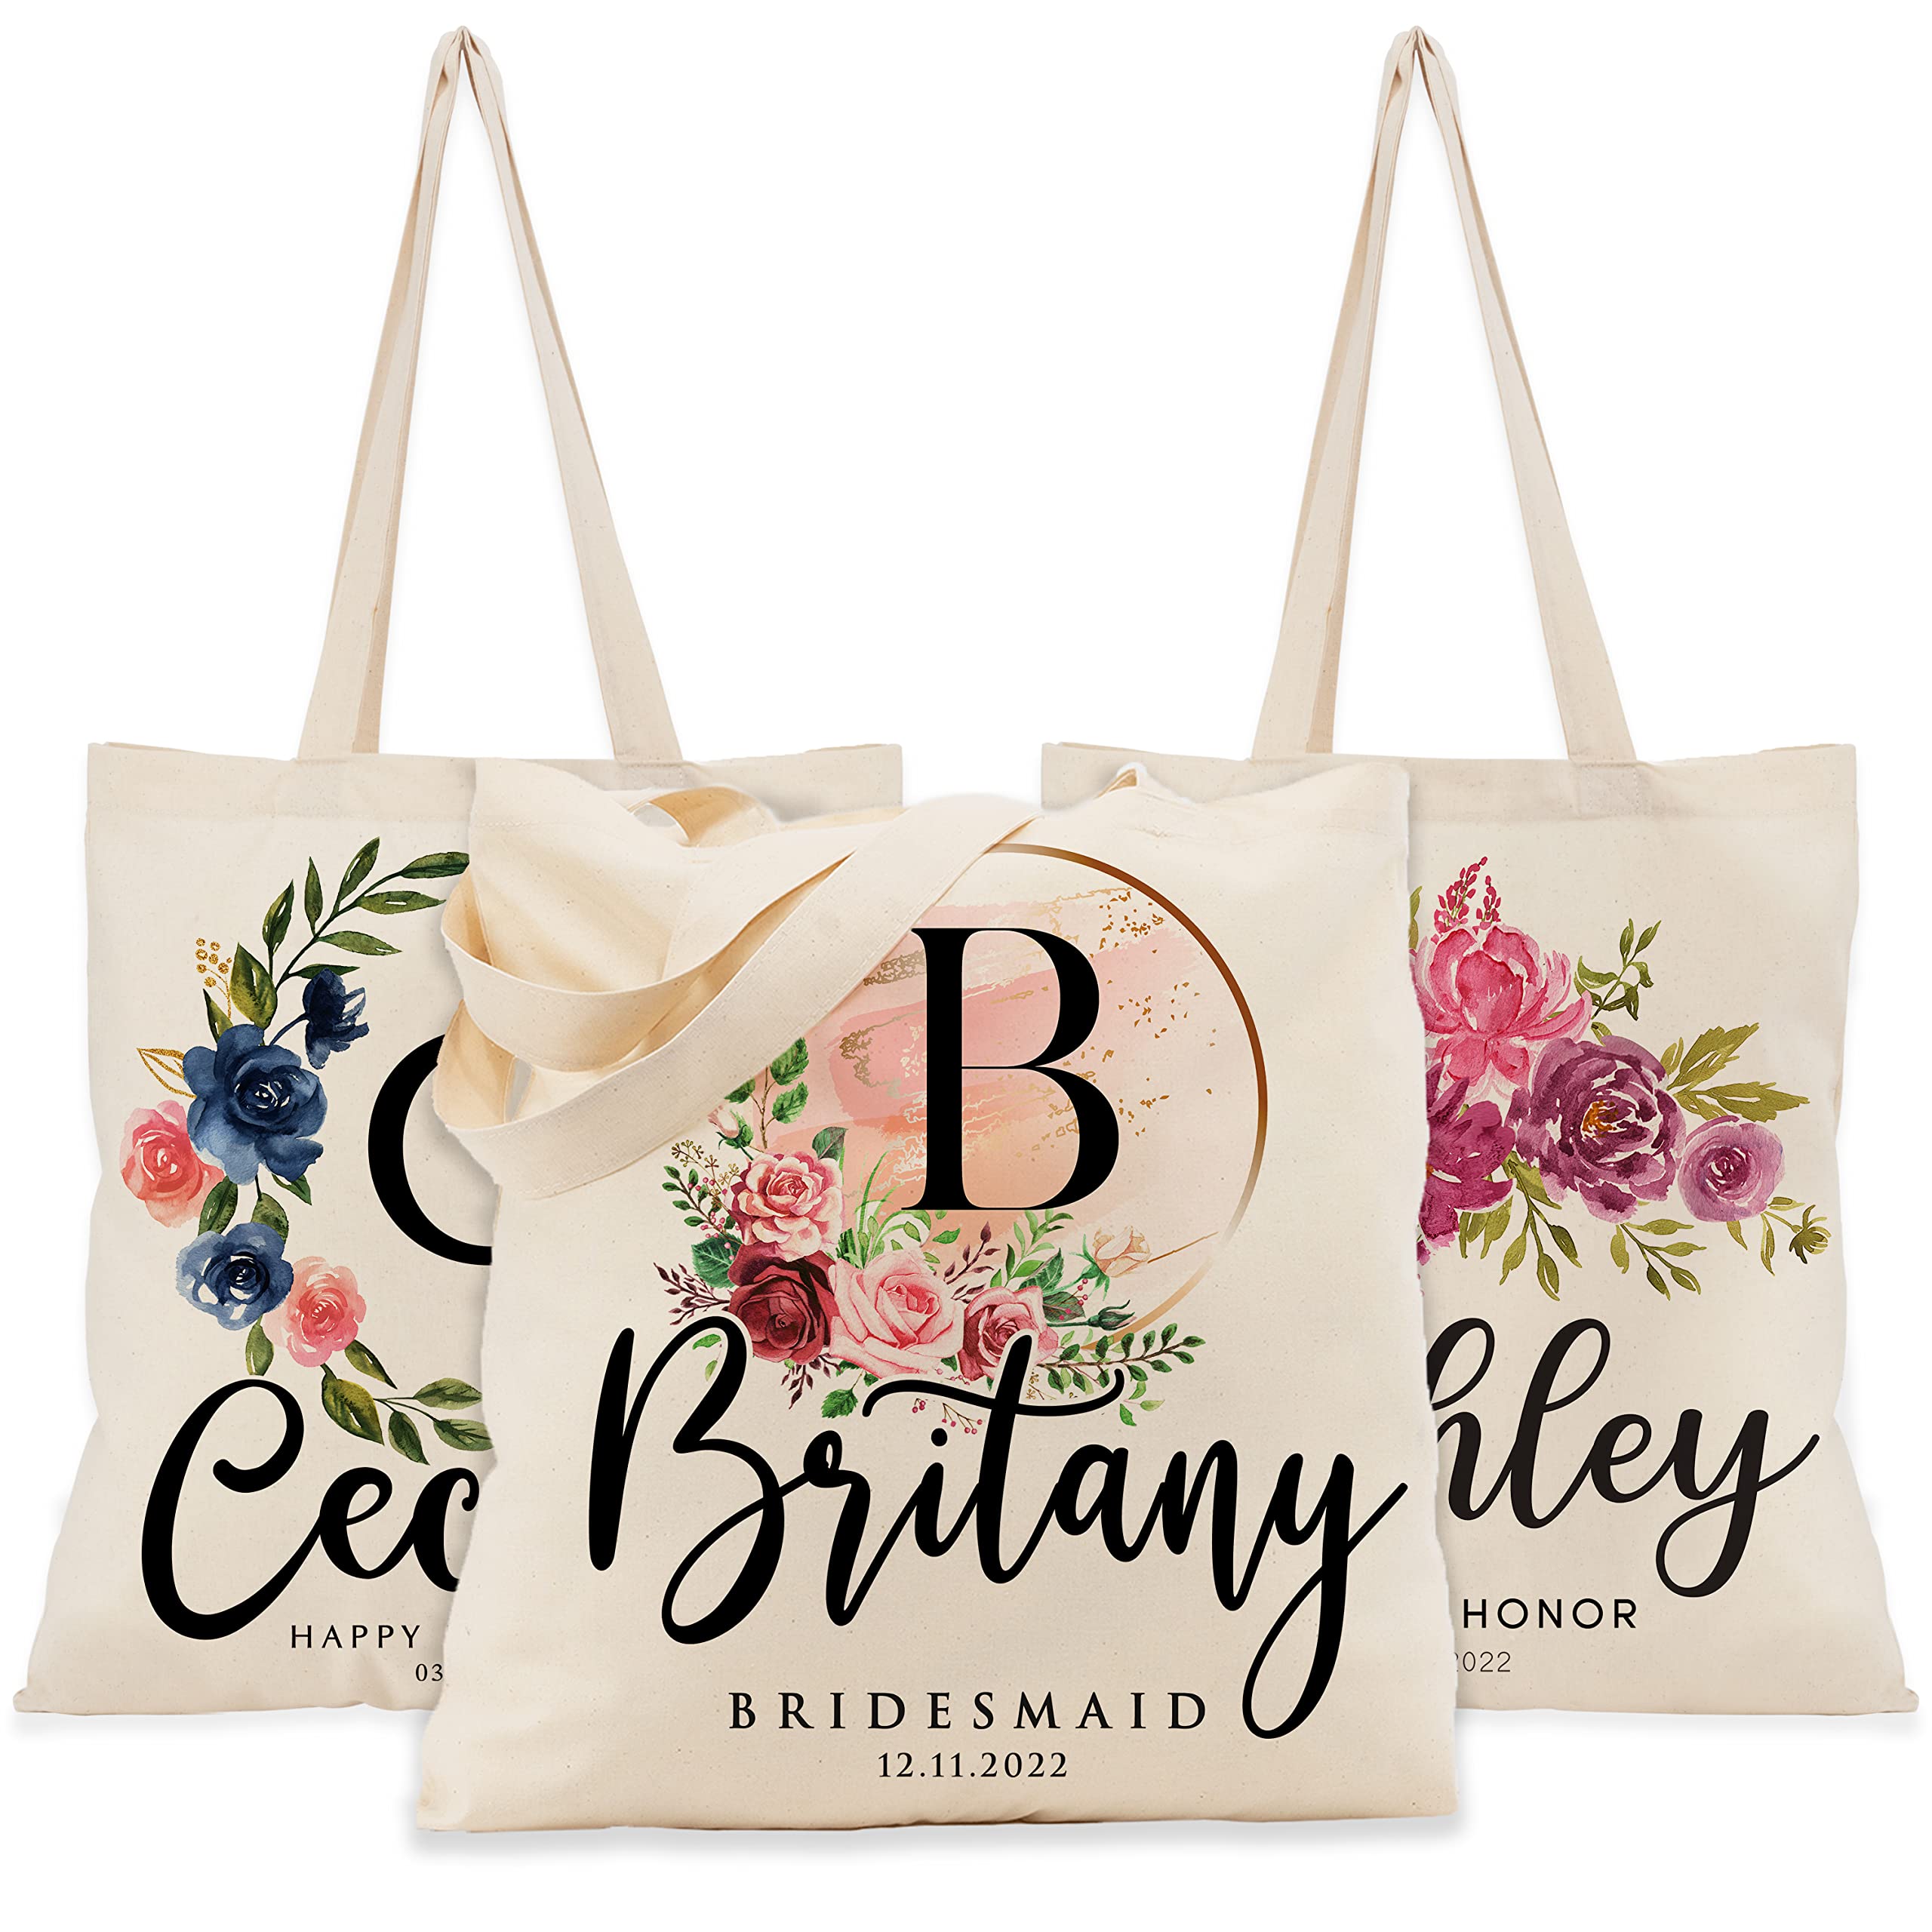 Calico Bags Canvas Bags Cotton Bags Tote Bags Plain Bags Logo Printed  Custom Bags Leather Bags Travel Bags - Calico Tote Bags Canvas Tote Bags  Cotton Tote bags Leather Bags Travel BagsTDelivery